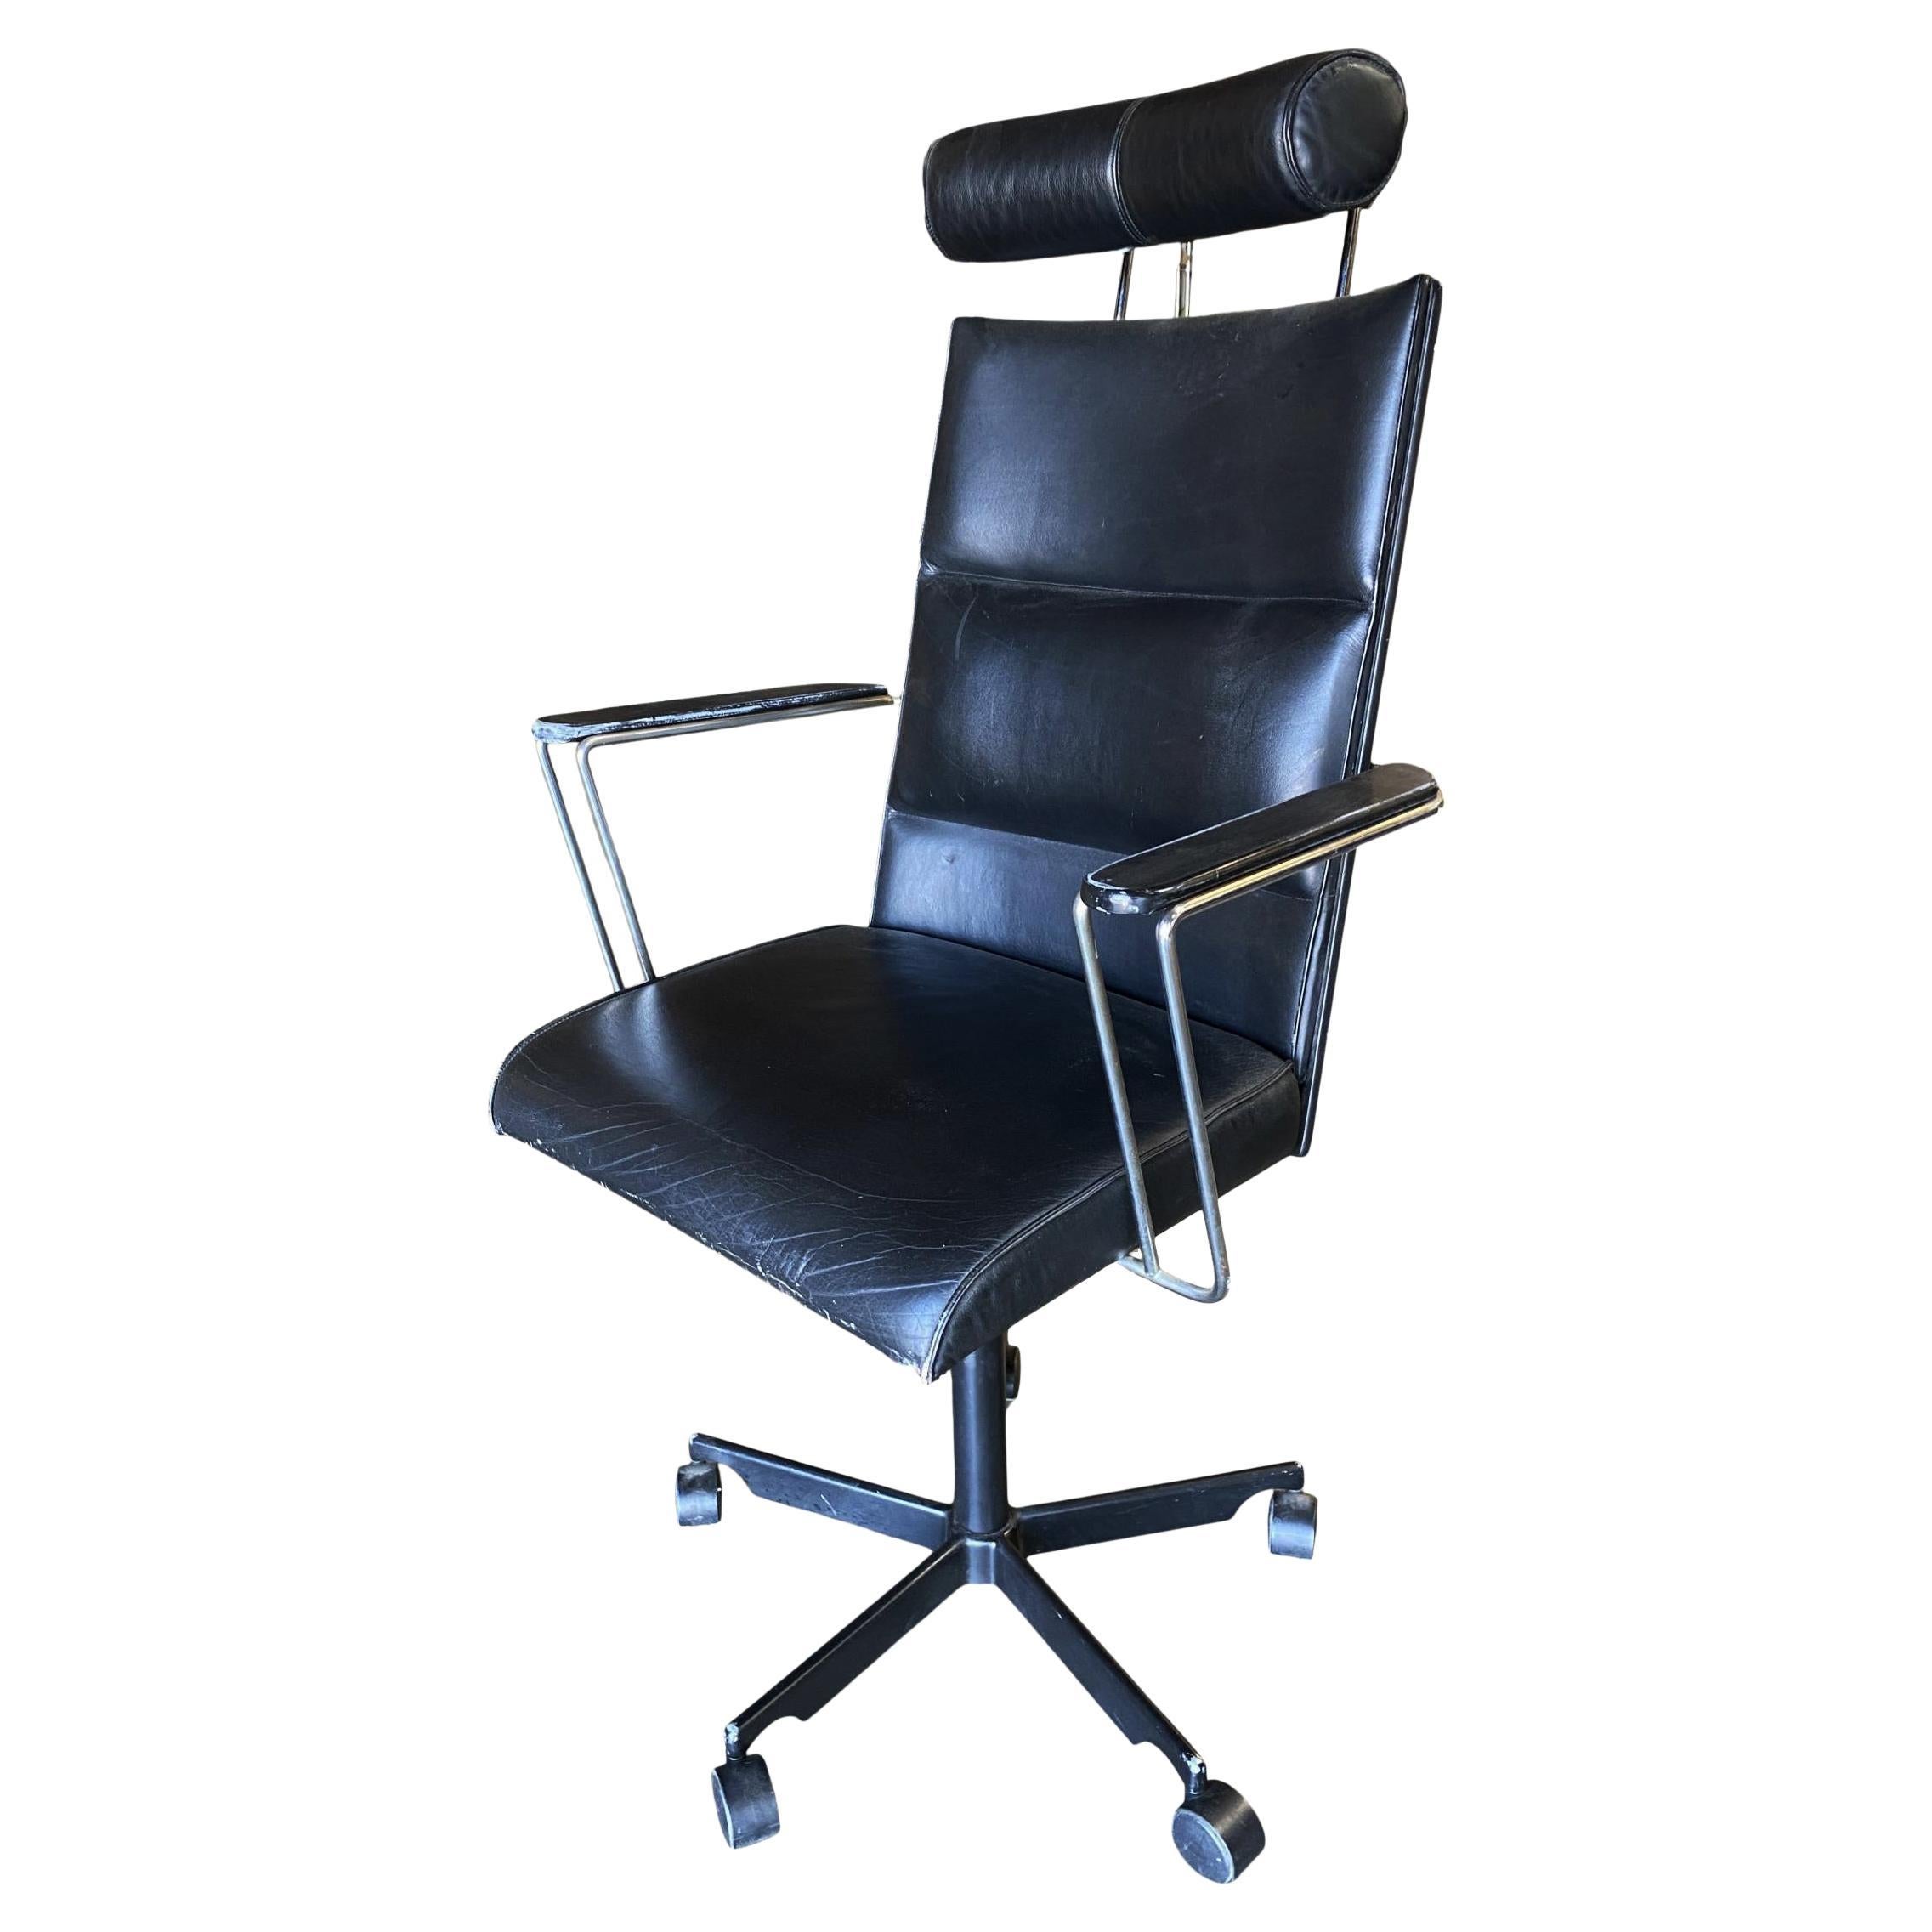 1980's Danish Modern Black and Chrome Executive Desk Chair by Kevi For Sale